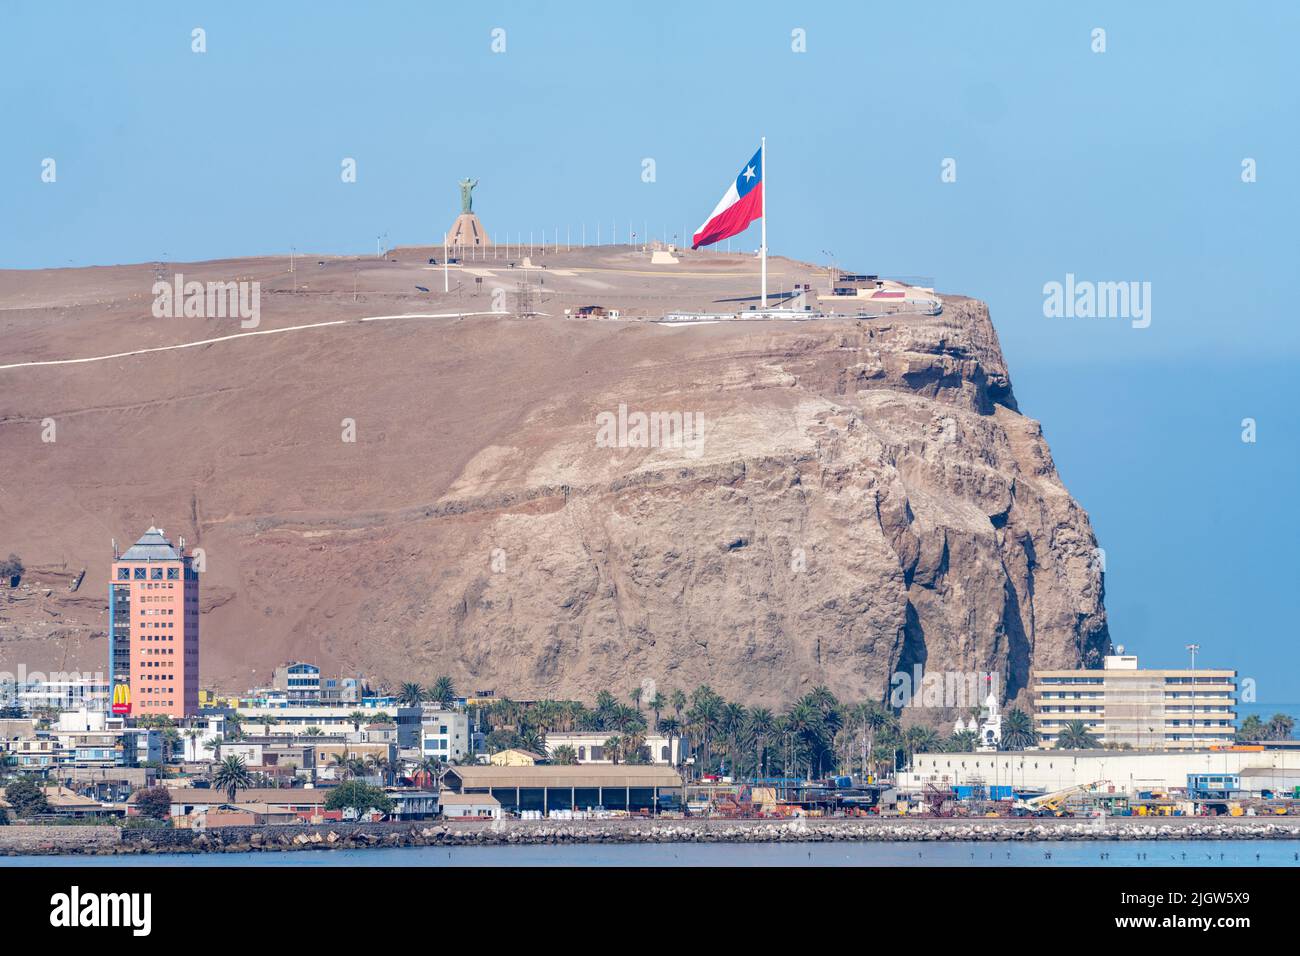 El Morro hill with its giant Chilean flag and Christus statue overlooks the city of Arica, Chile. Stock Photo